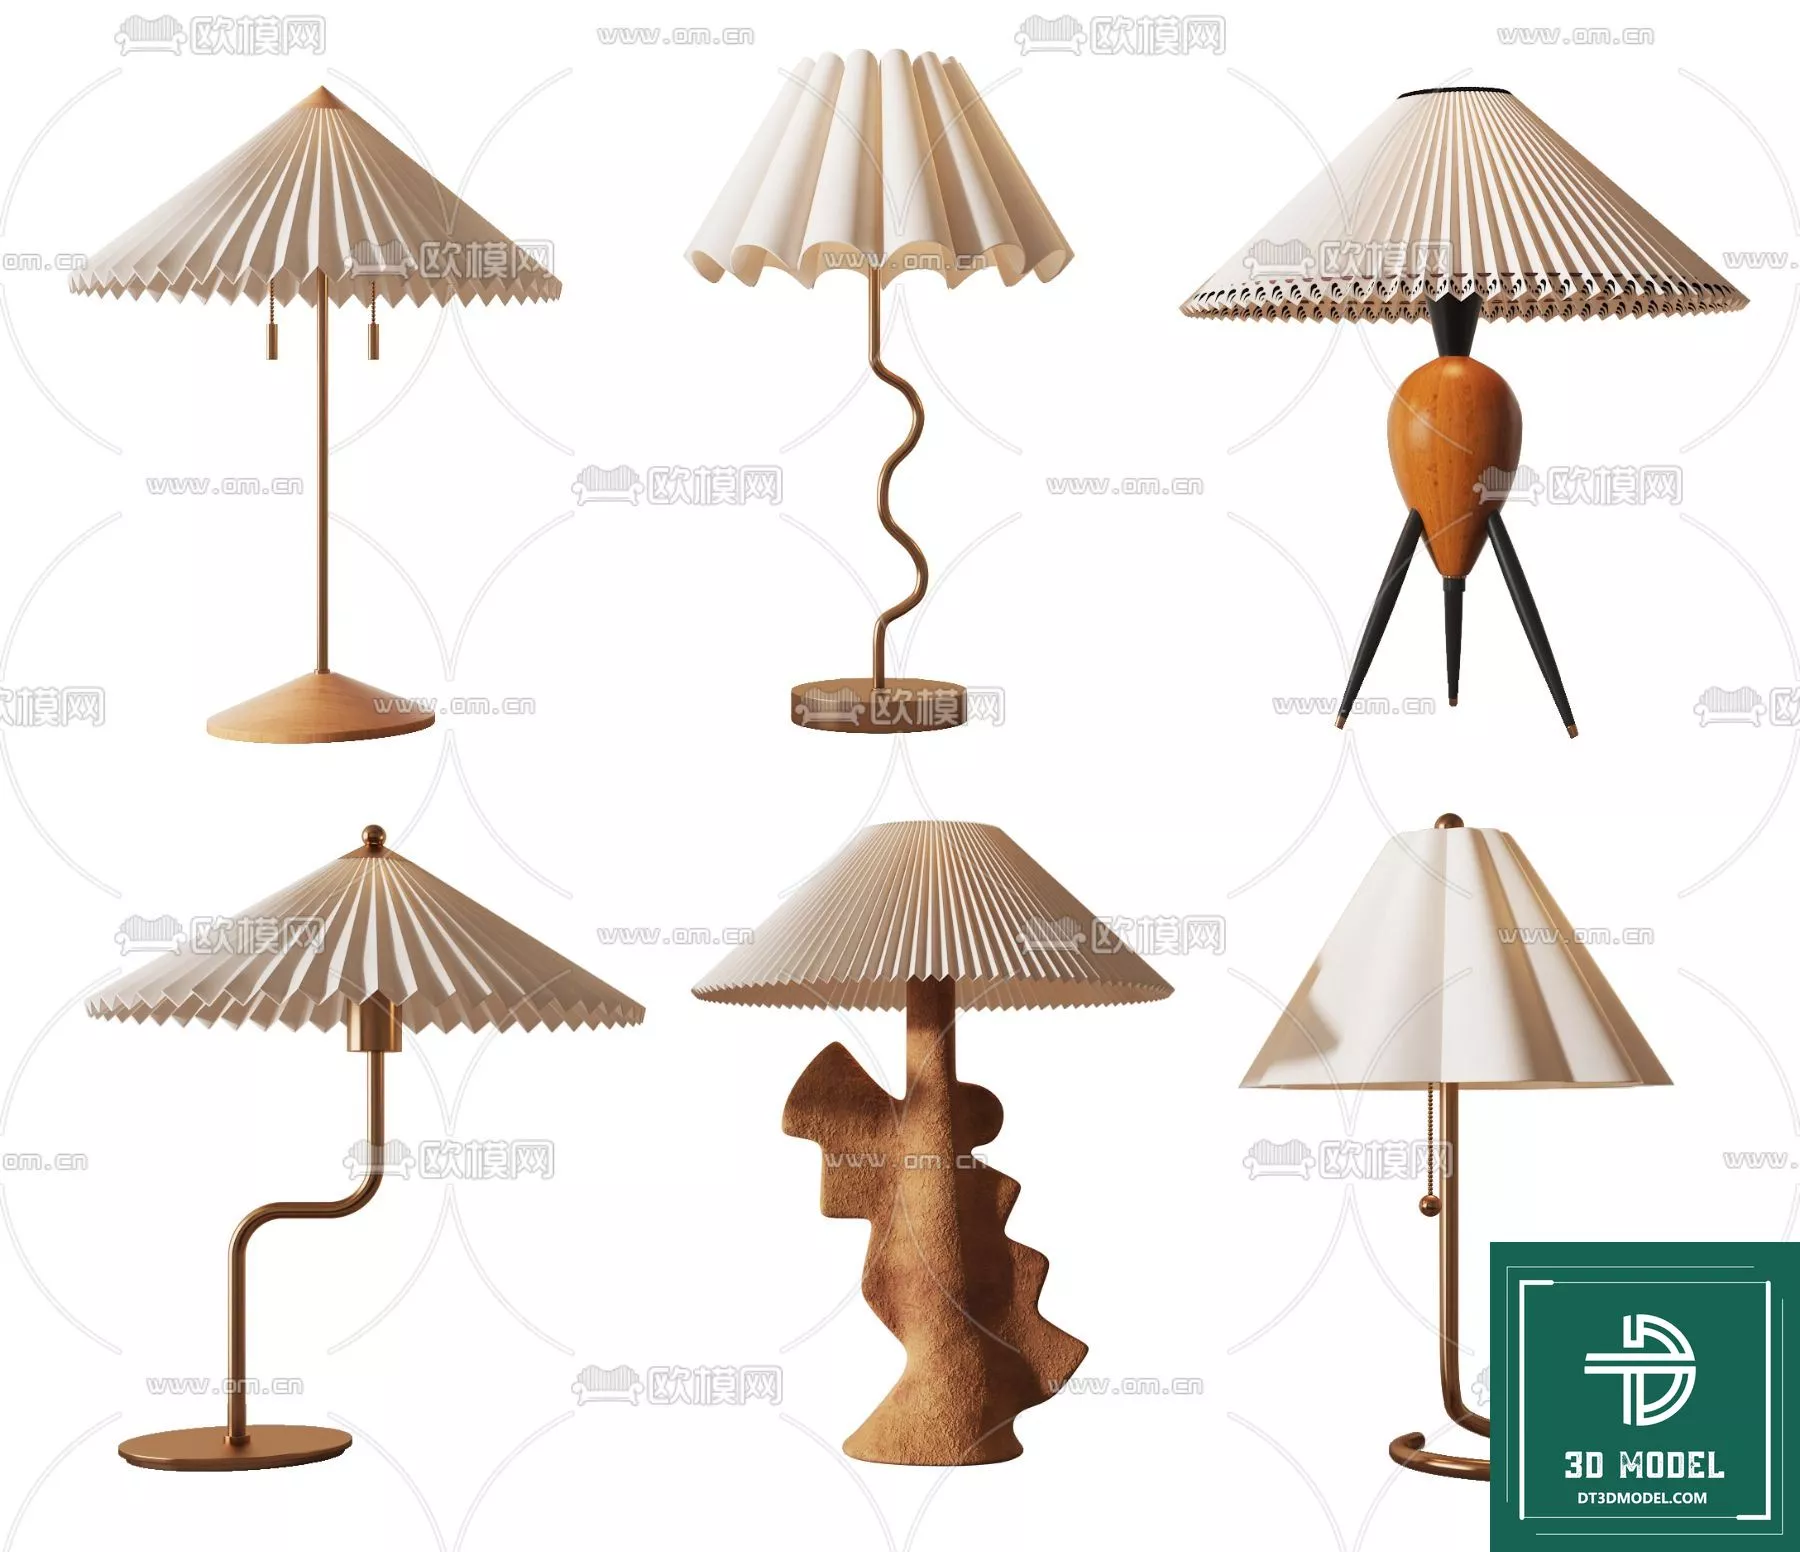 MODERN TABLE LAMP - SKETCHUP 3D MODEL - VRAY OR ENSCAPE - ID14594